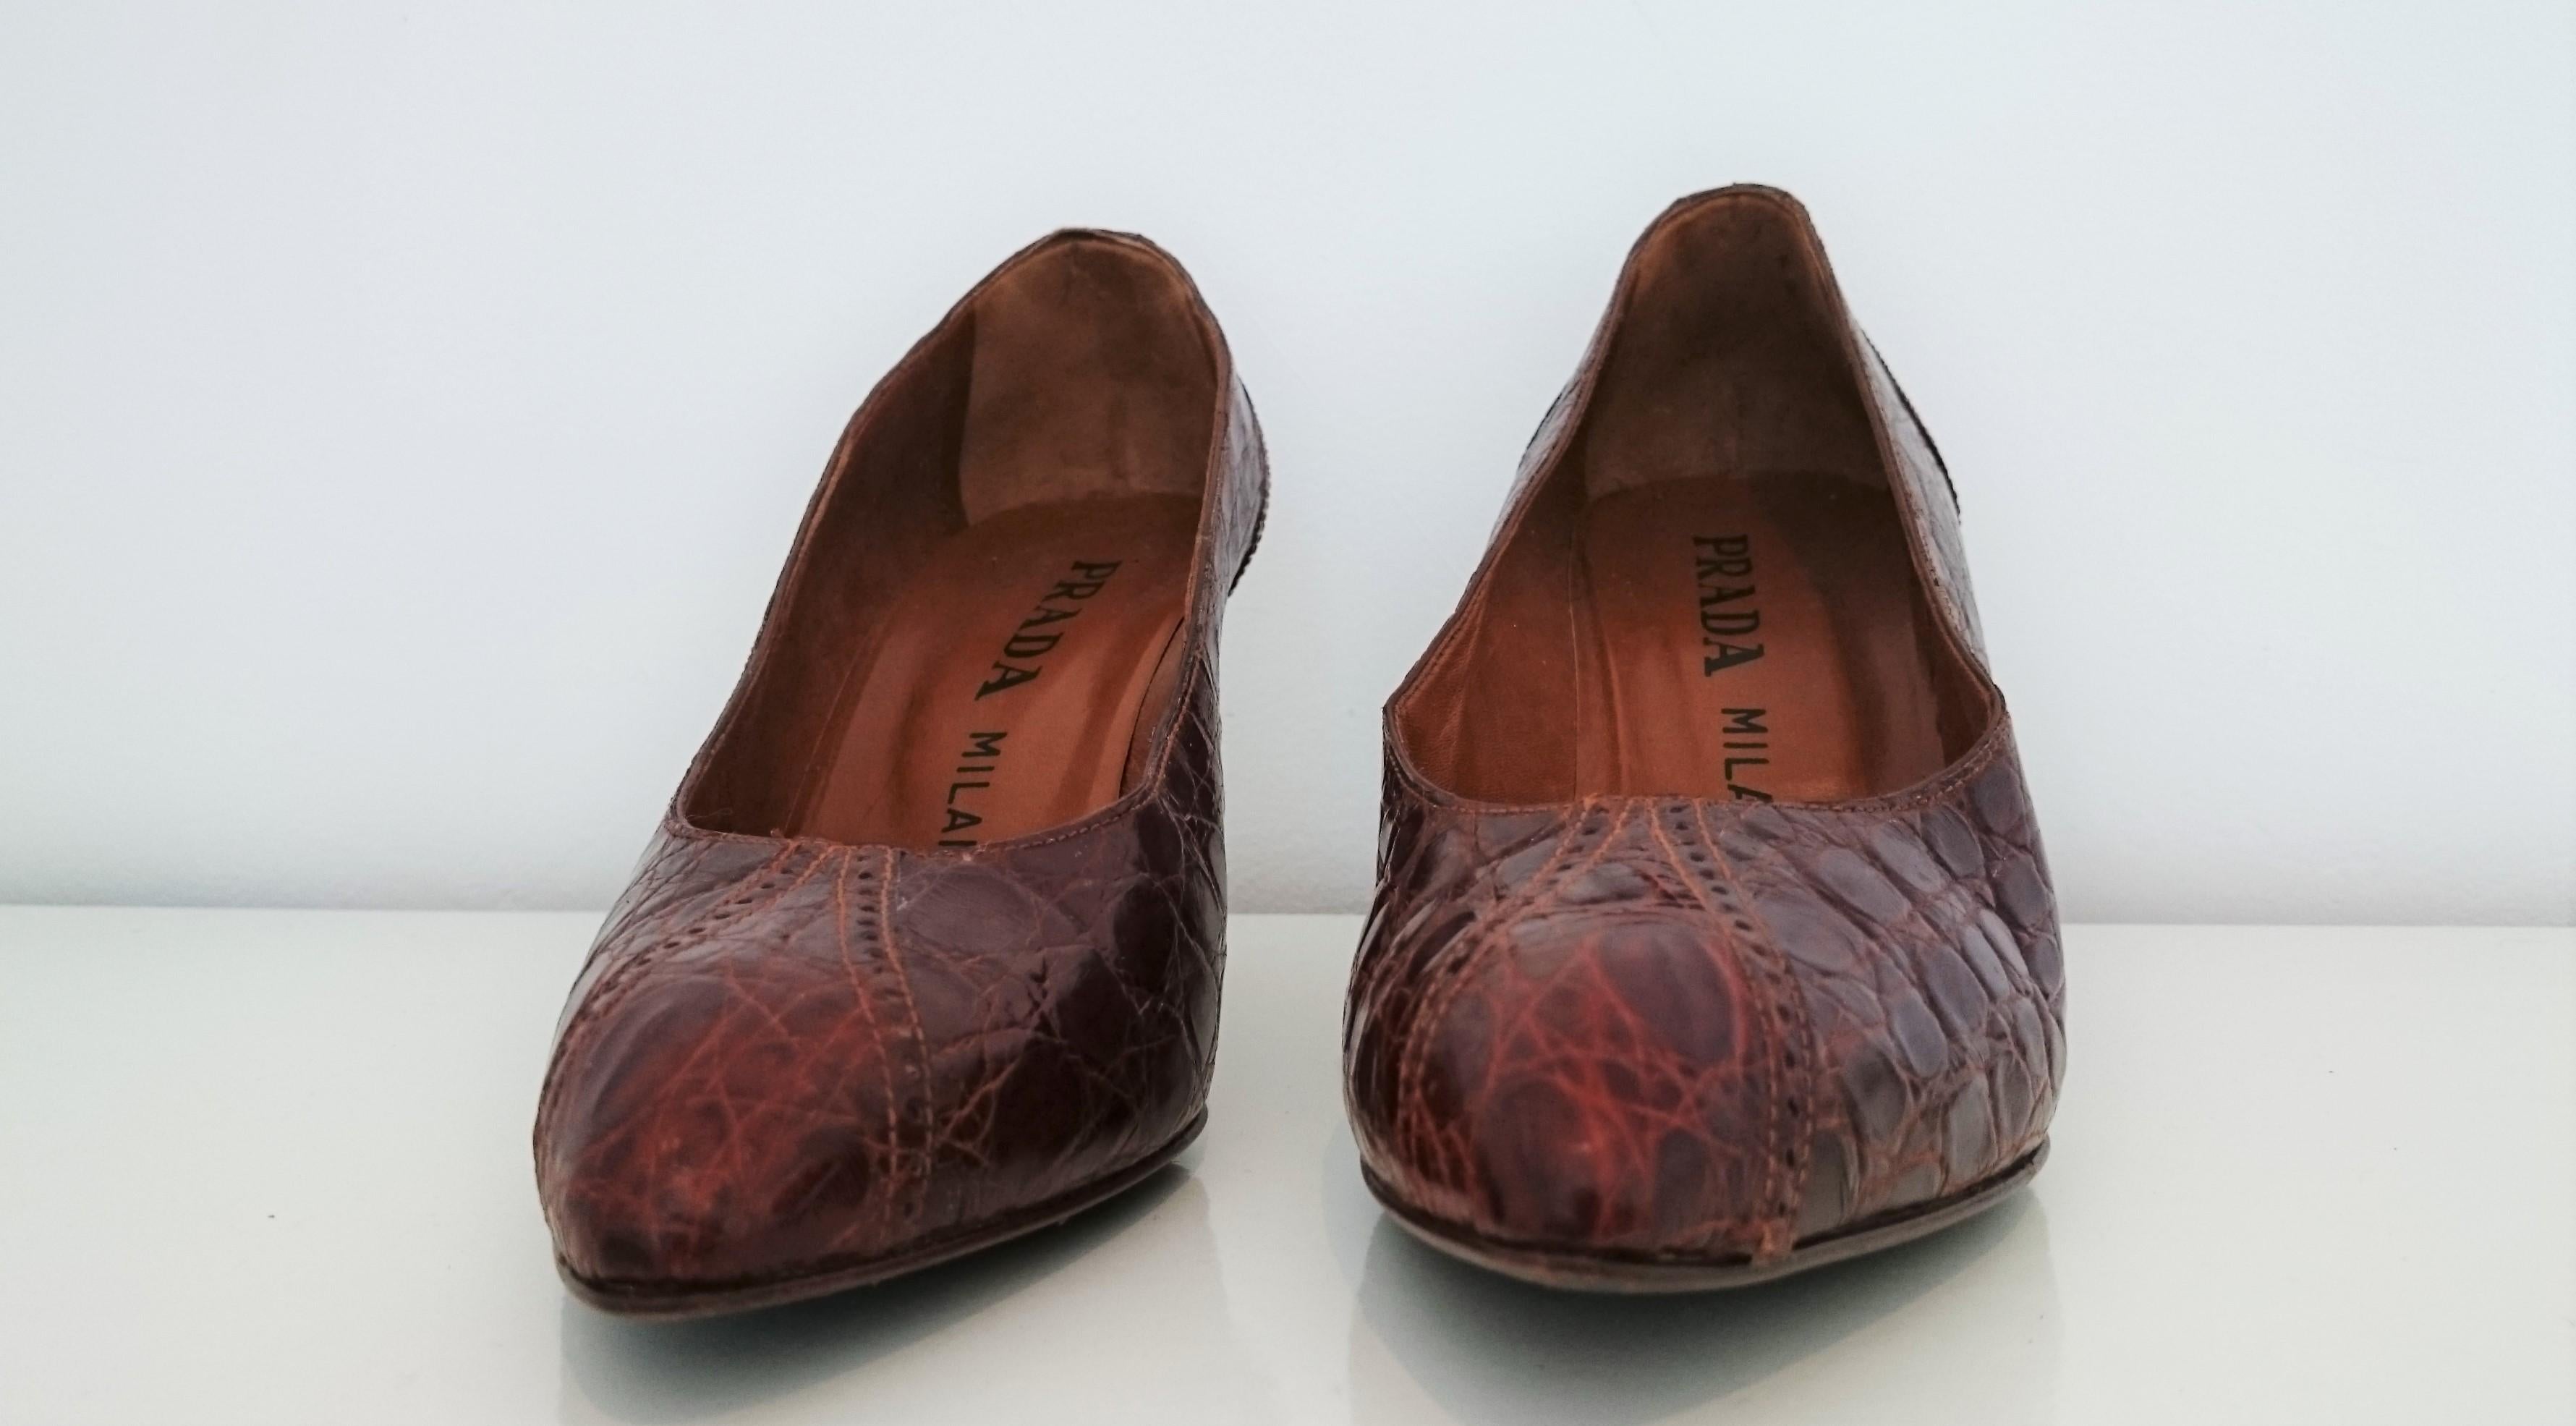 Prada Heels in Wild Crocodile Brown Leather with Wood Sole.
Beautiful crafted design by hand.
Great conditions.
Heel height: 7.5 cm
Size: 39 1/2 (EU)
Made in italy